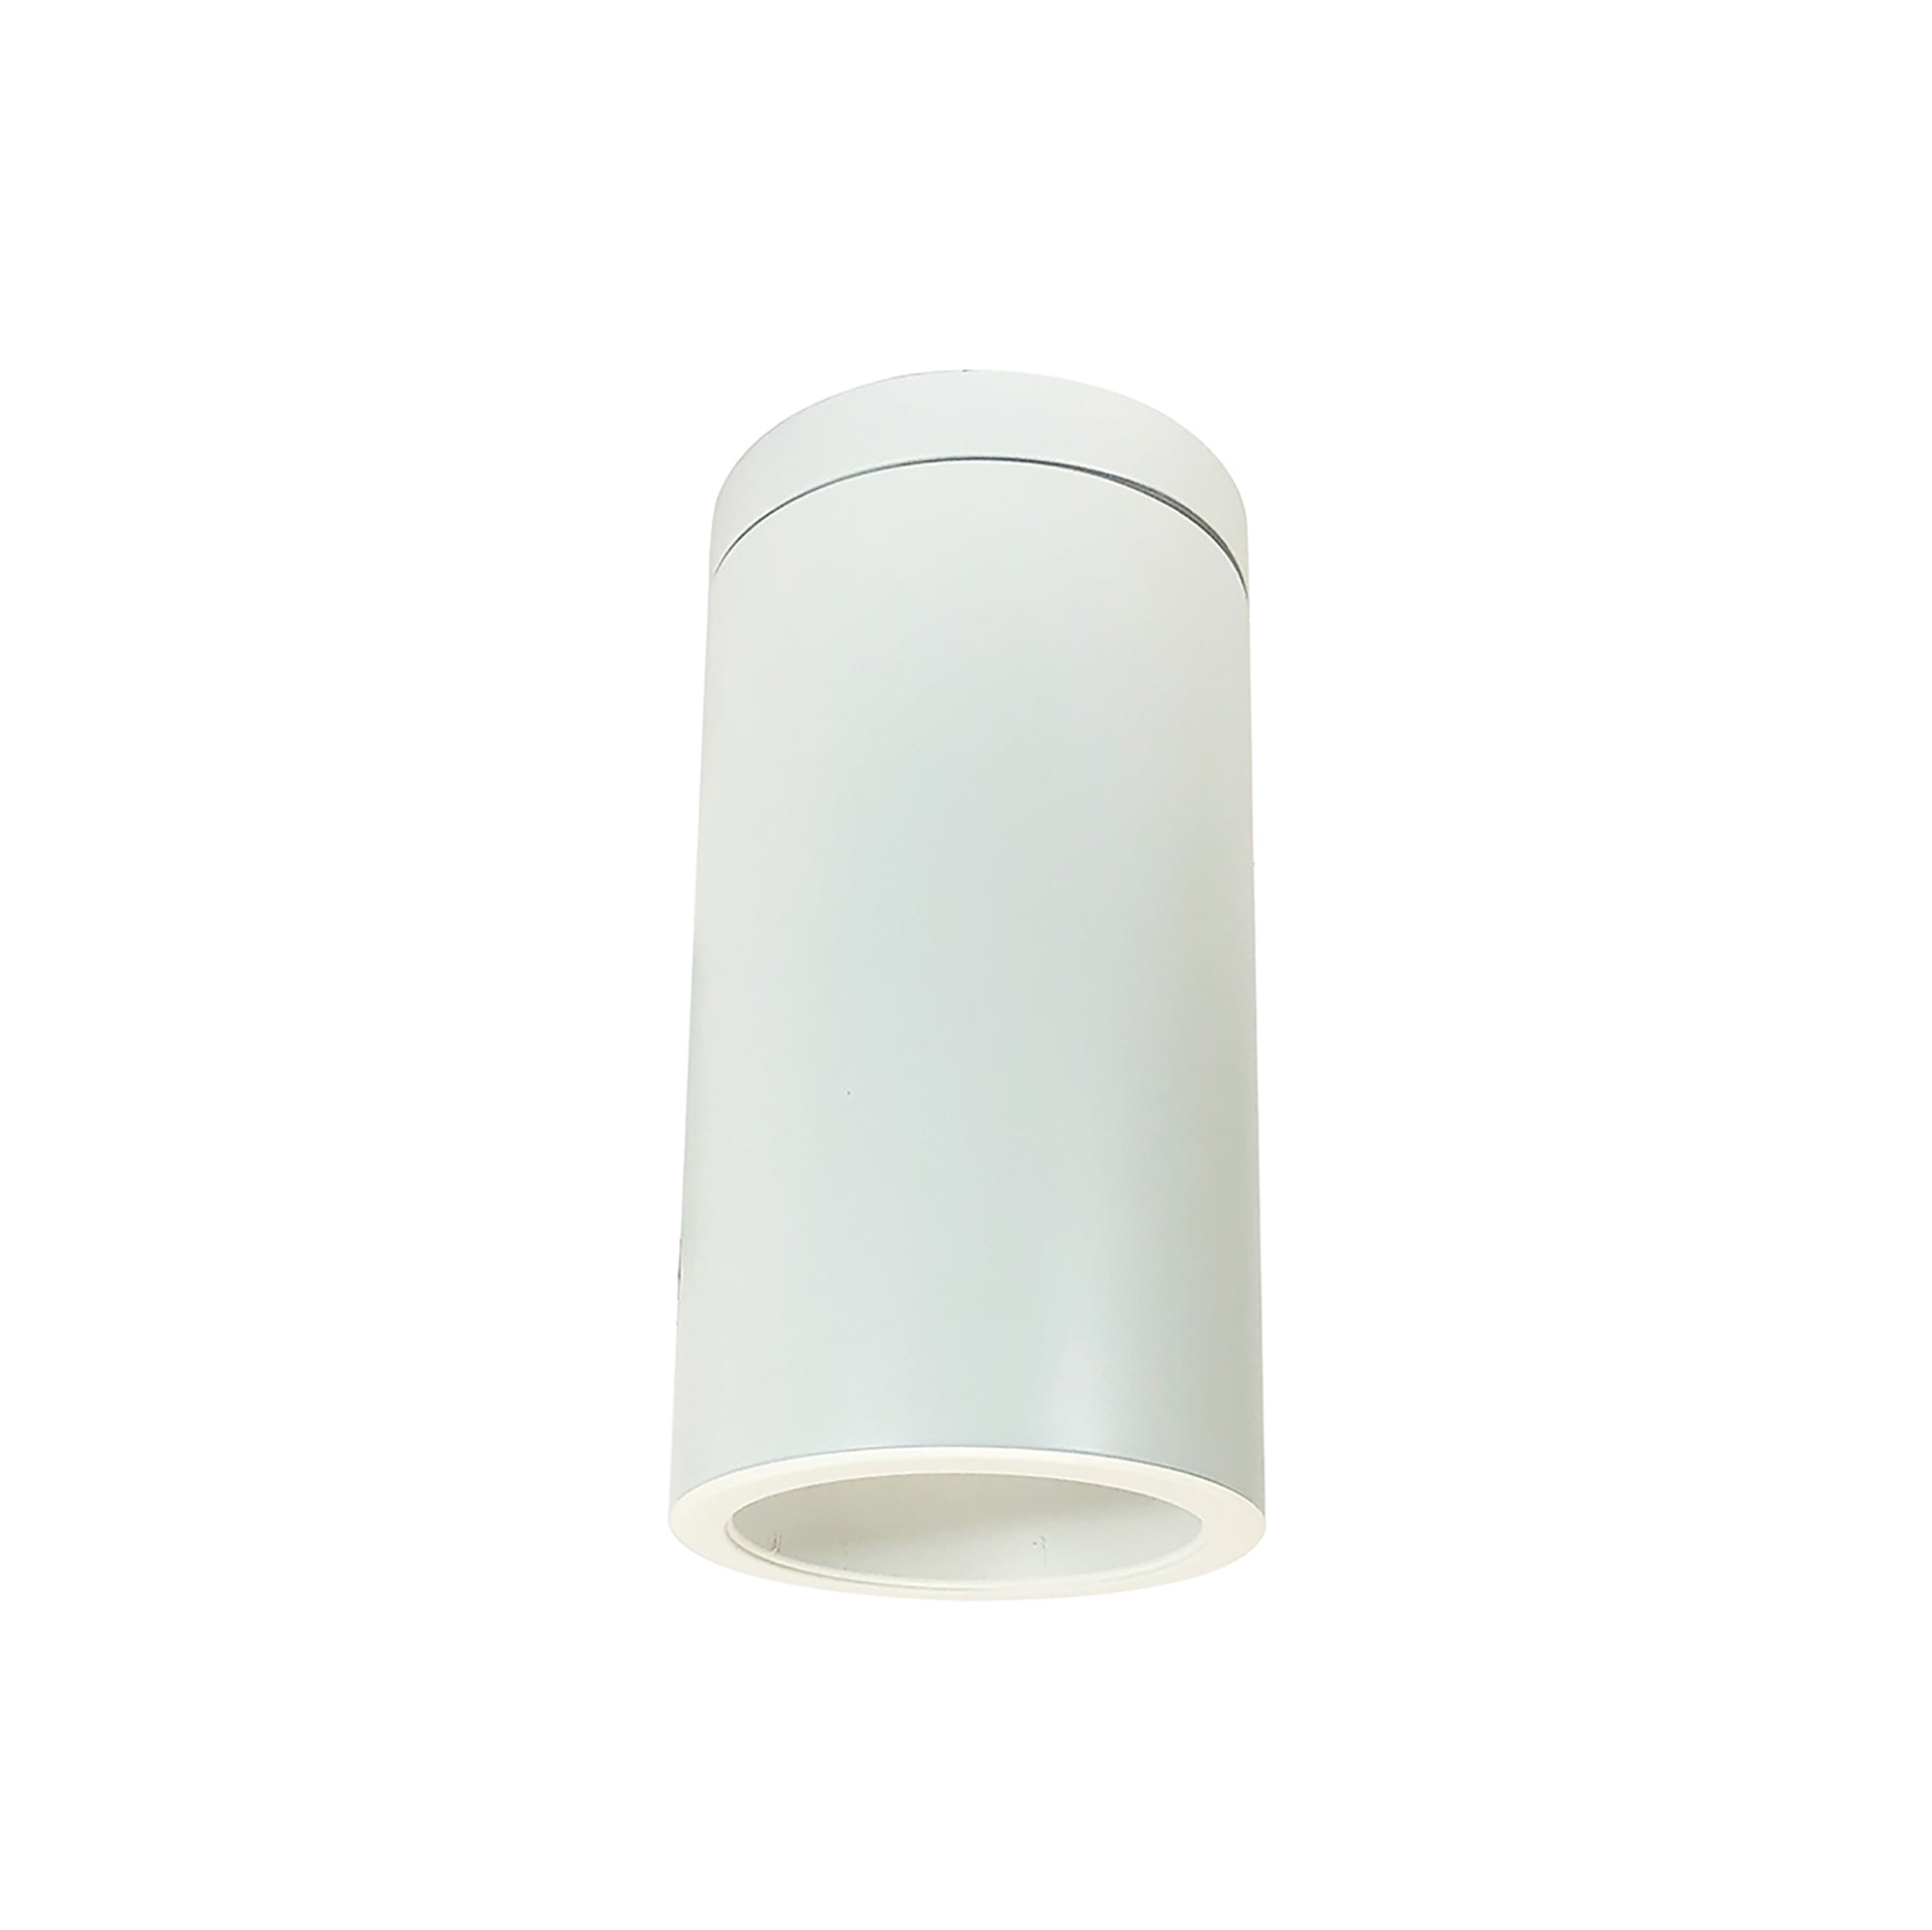 Nora Lighting LE45 - NYLS2-6S25130MWWW6